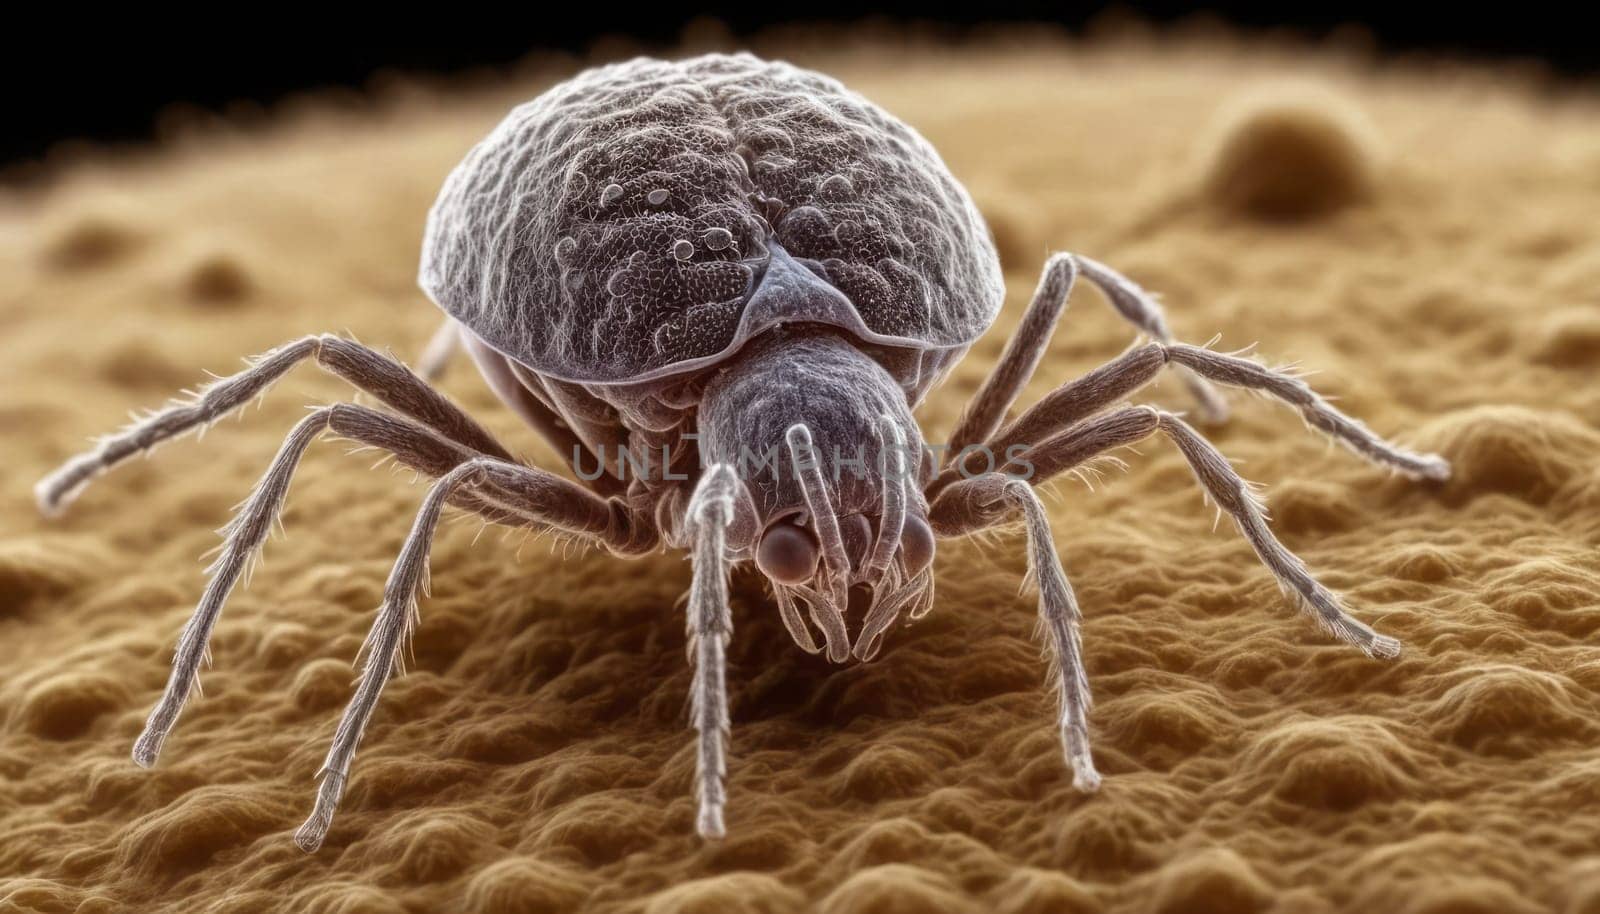 Dust Mite Magnified on Rough Surface by nkotlyar